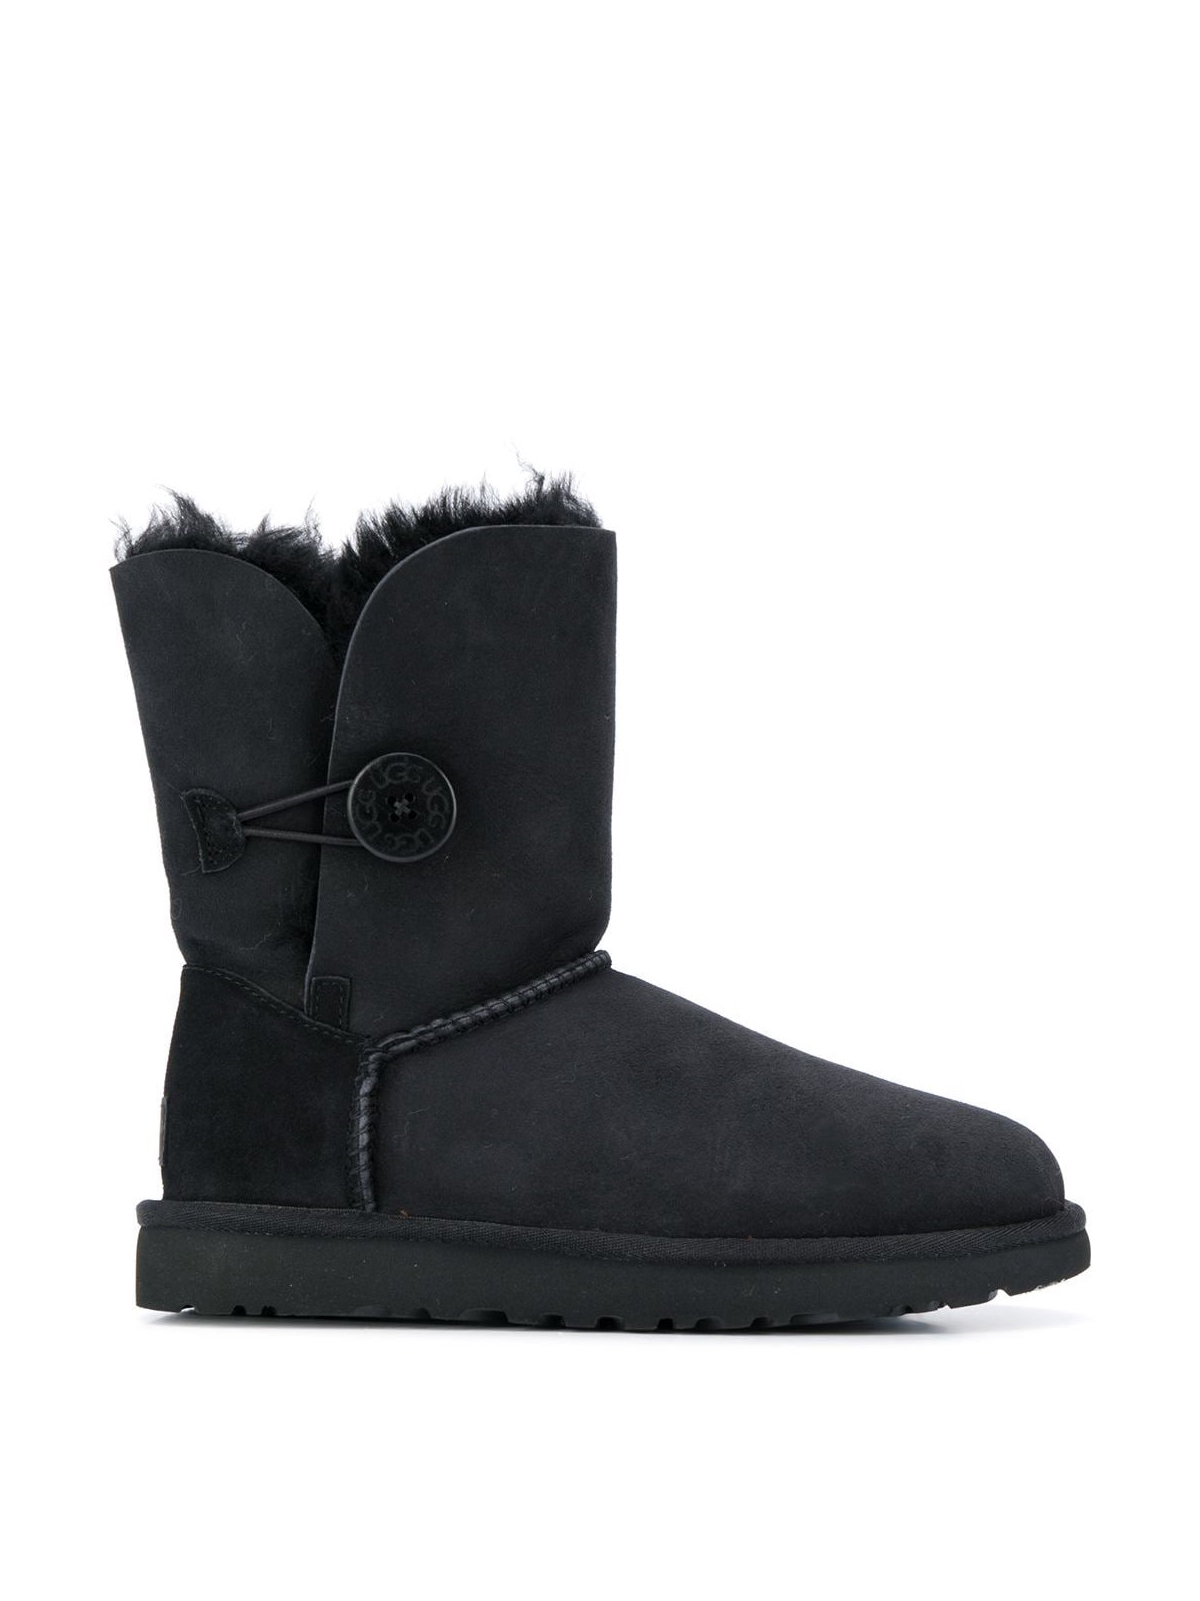 Bailey Button II Black Boots